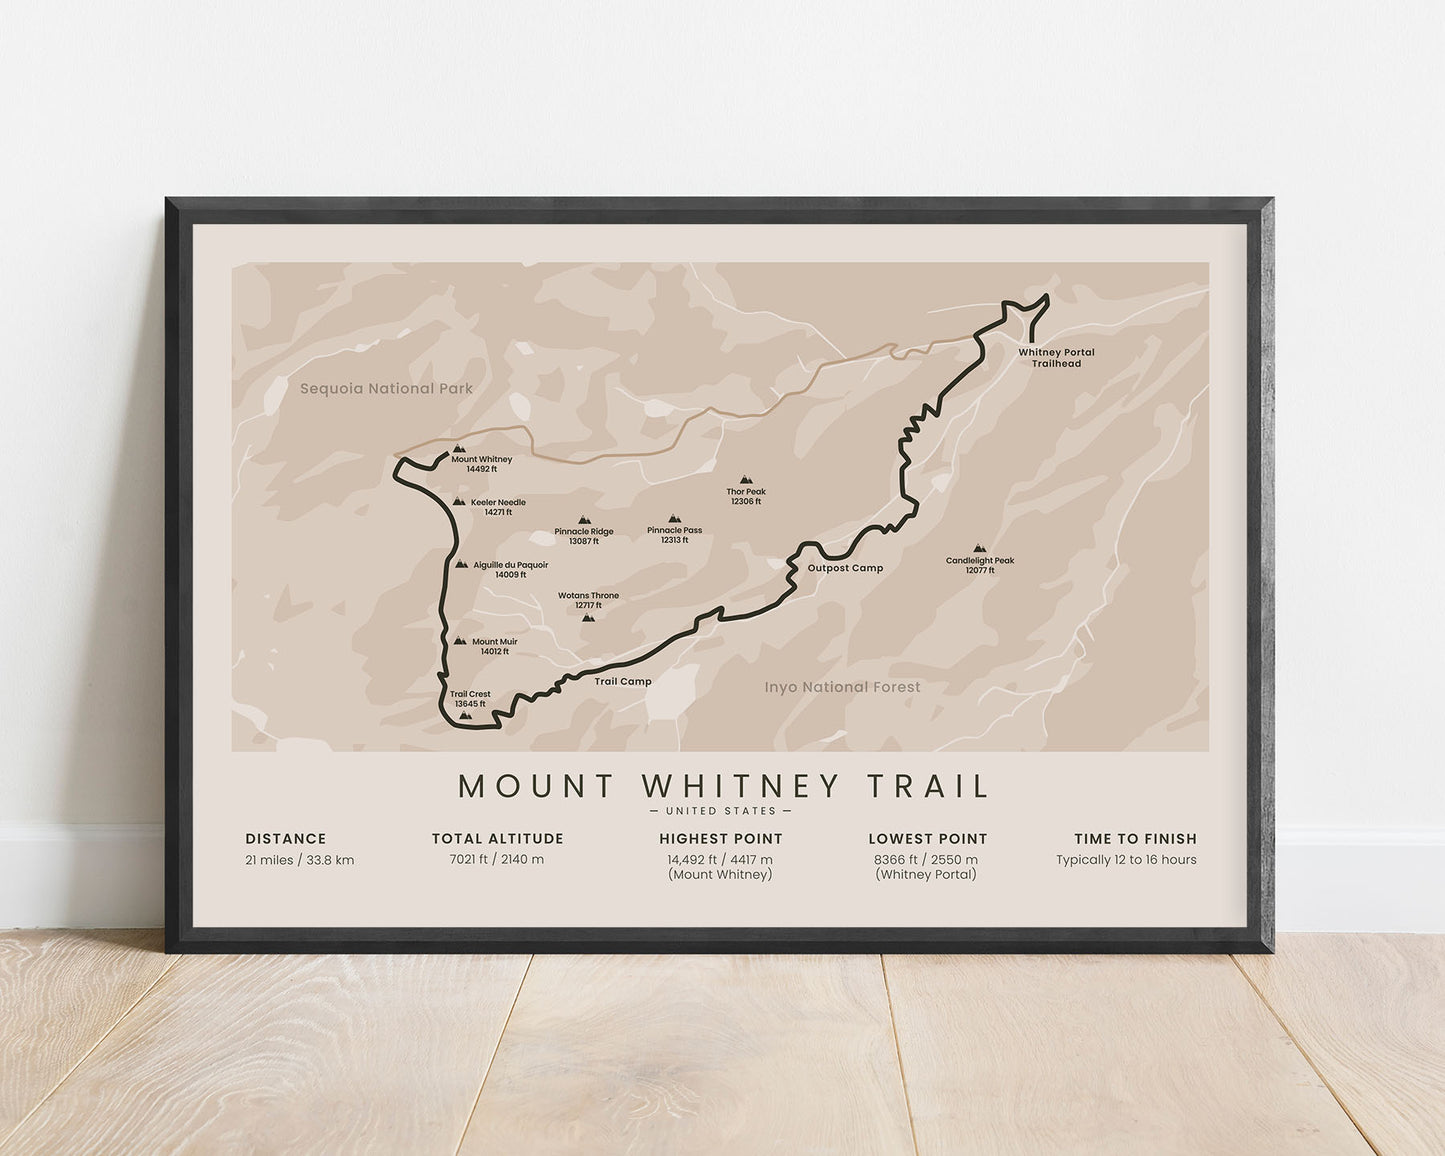 Mount Whitney Trail (California) hiking Path Map with beige background